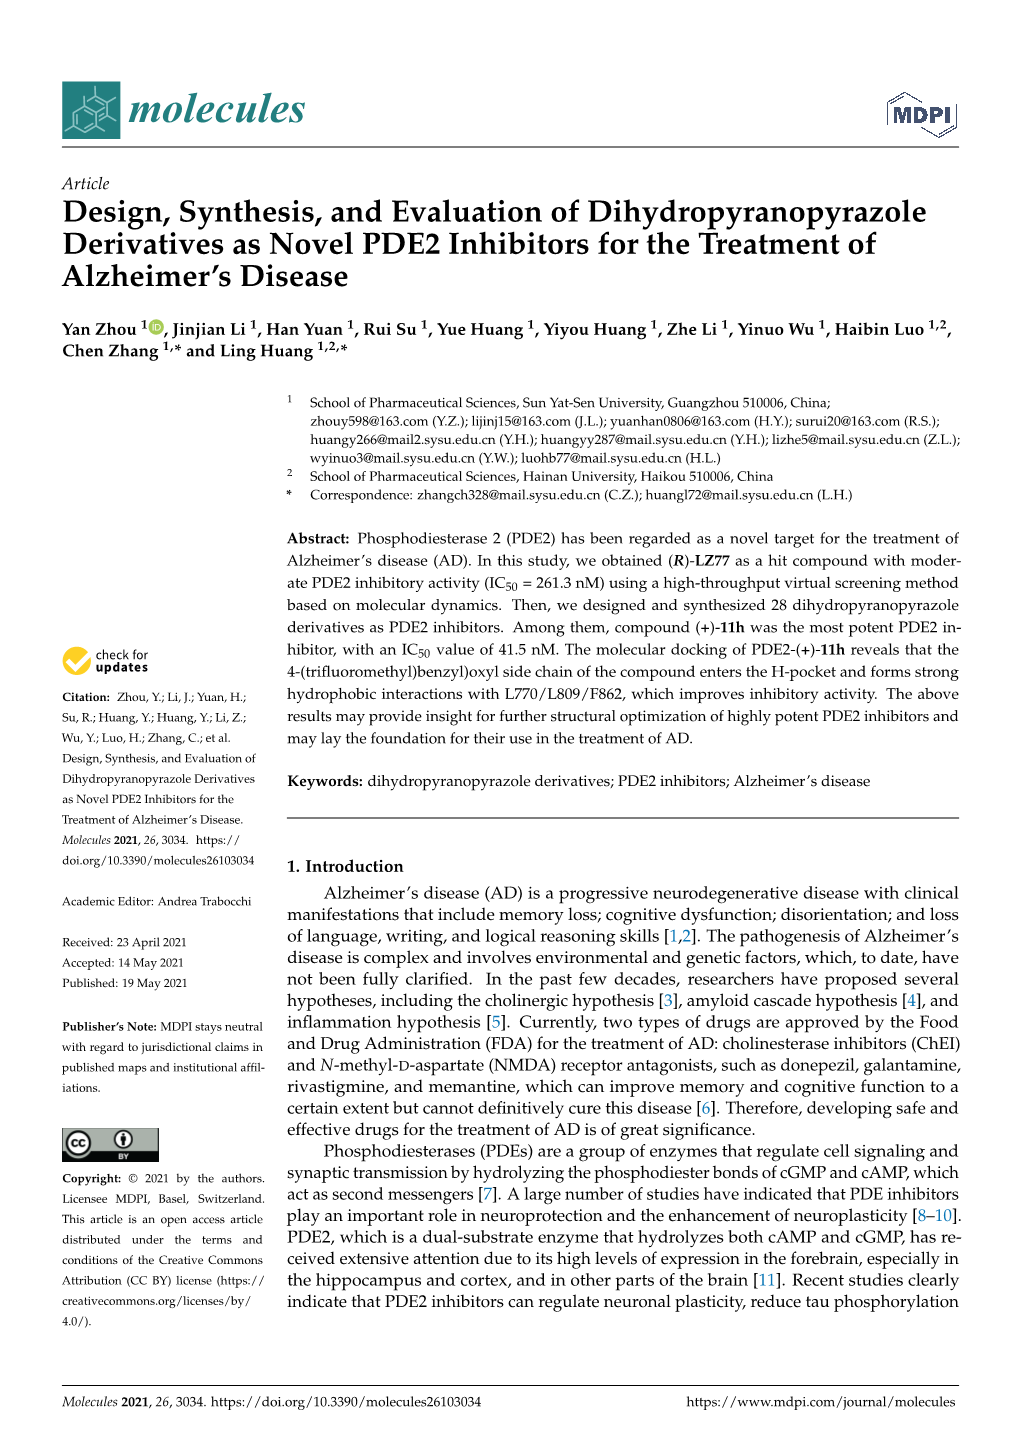 Design, Synthesis, and Evaluation of Dihydropyranopyrazole Derivatives As Novel PDE2 Inhibitors for the Treatment of Alzheimer’S Disease